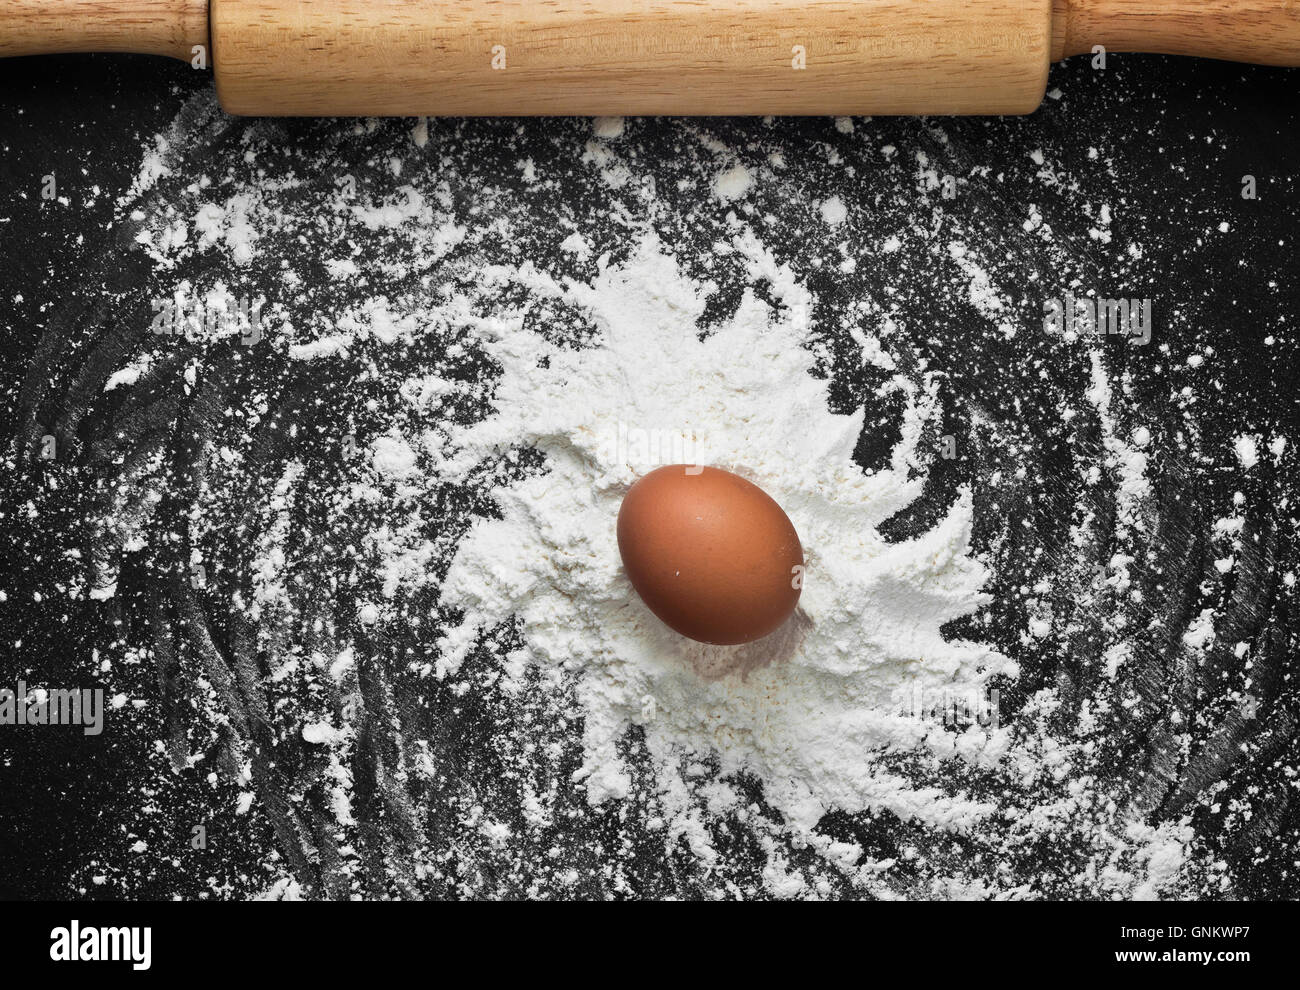 Galaxy on the Kitchen. Spiral of galaxy spelled by wheat flour and brown chicken egg on chalkboard Stock Photo